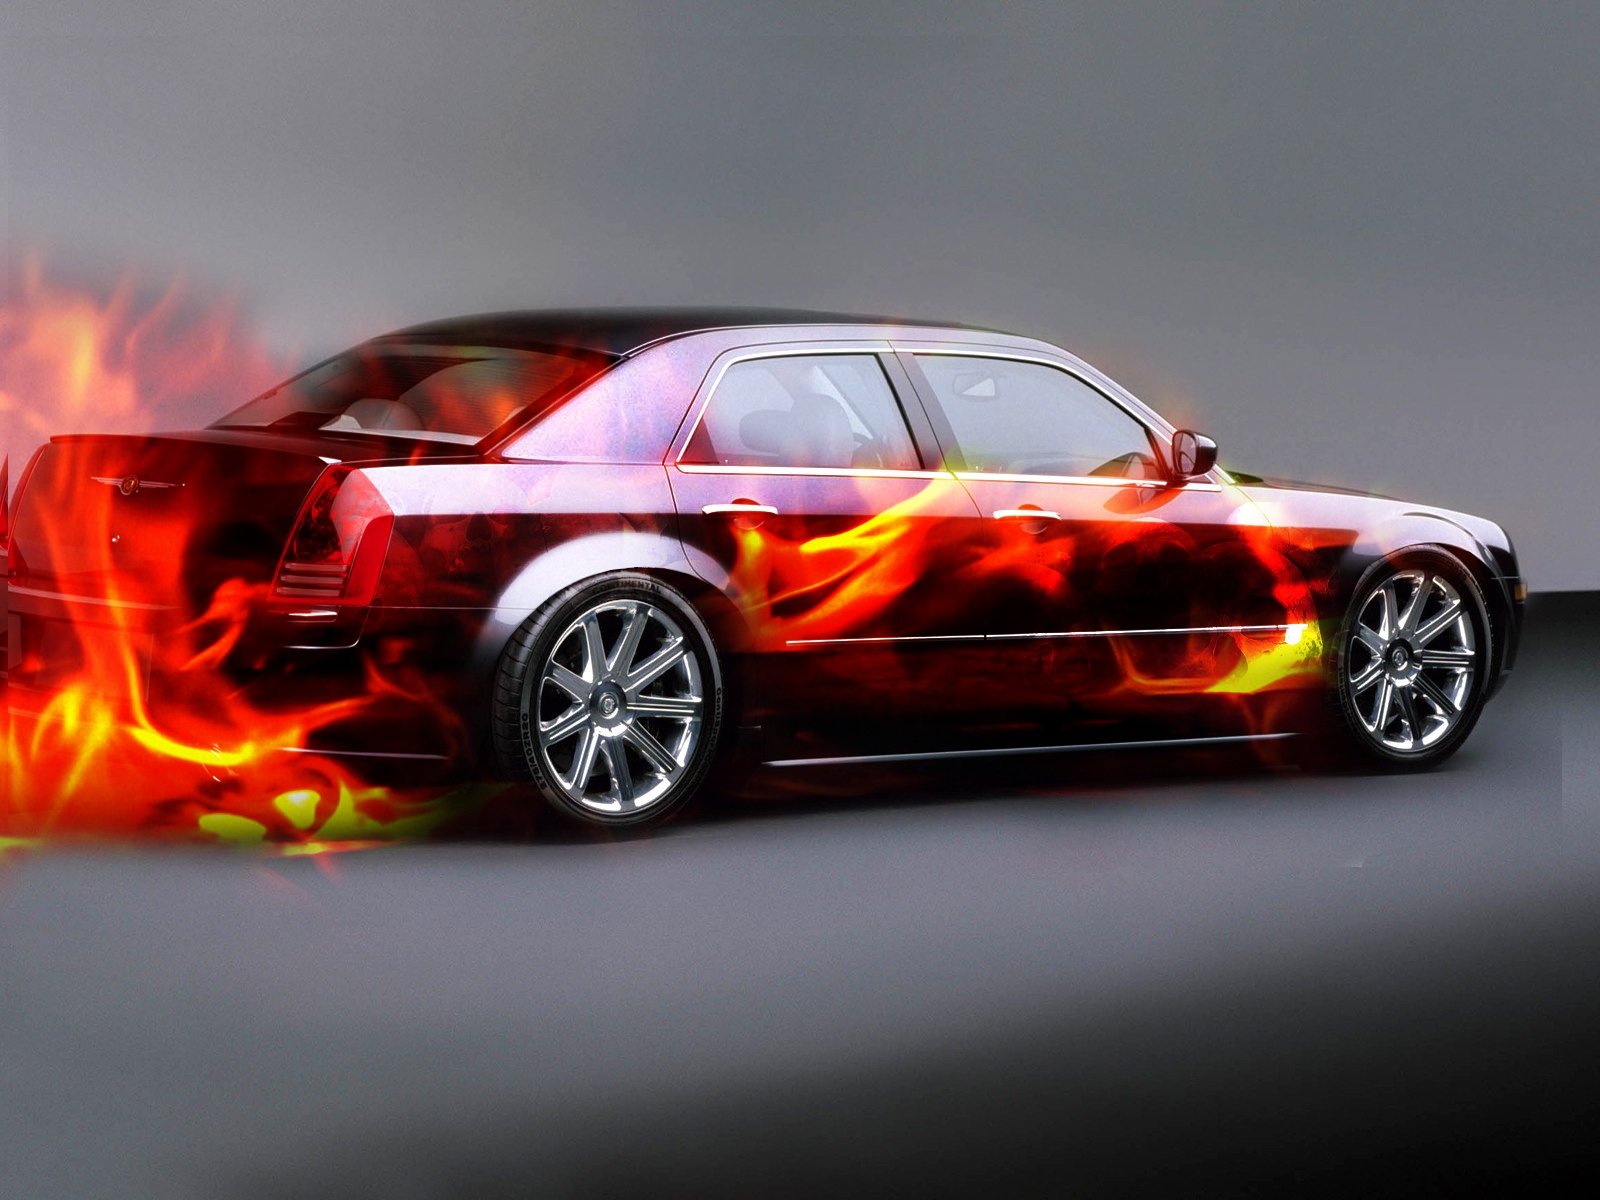 Hot Car Wallpaper Free Wallpapers For PC